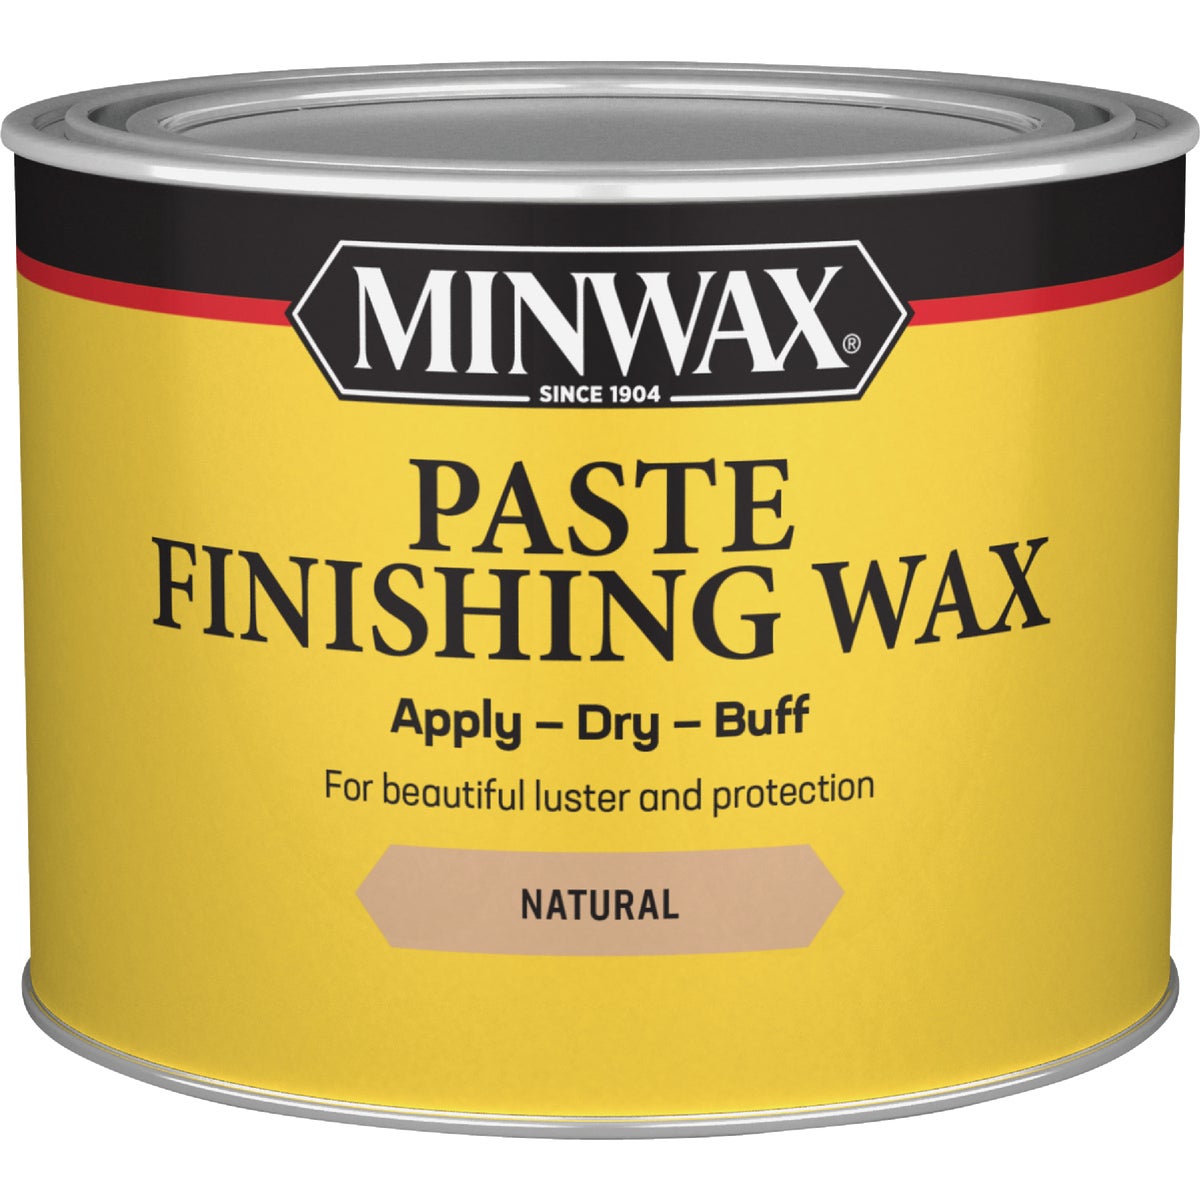 Item 782843, Minwax Paste Finishing Wax protects and adds hand rubbed luster to any 